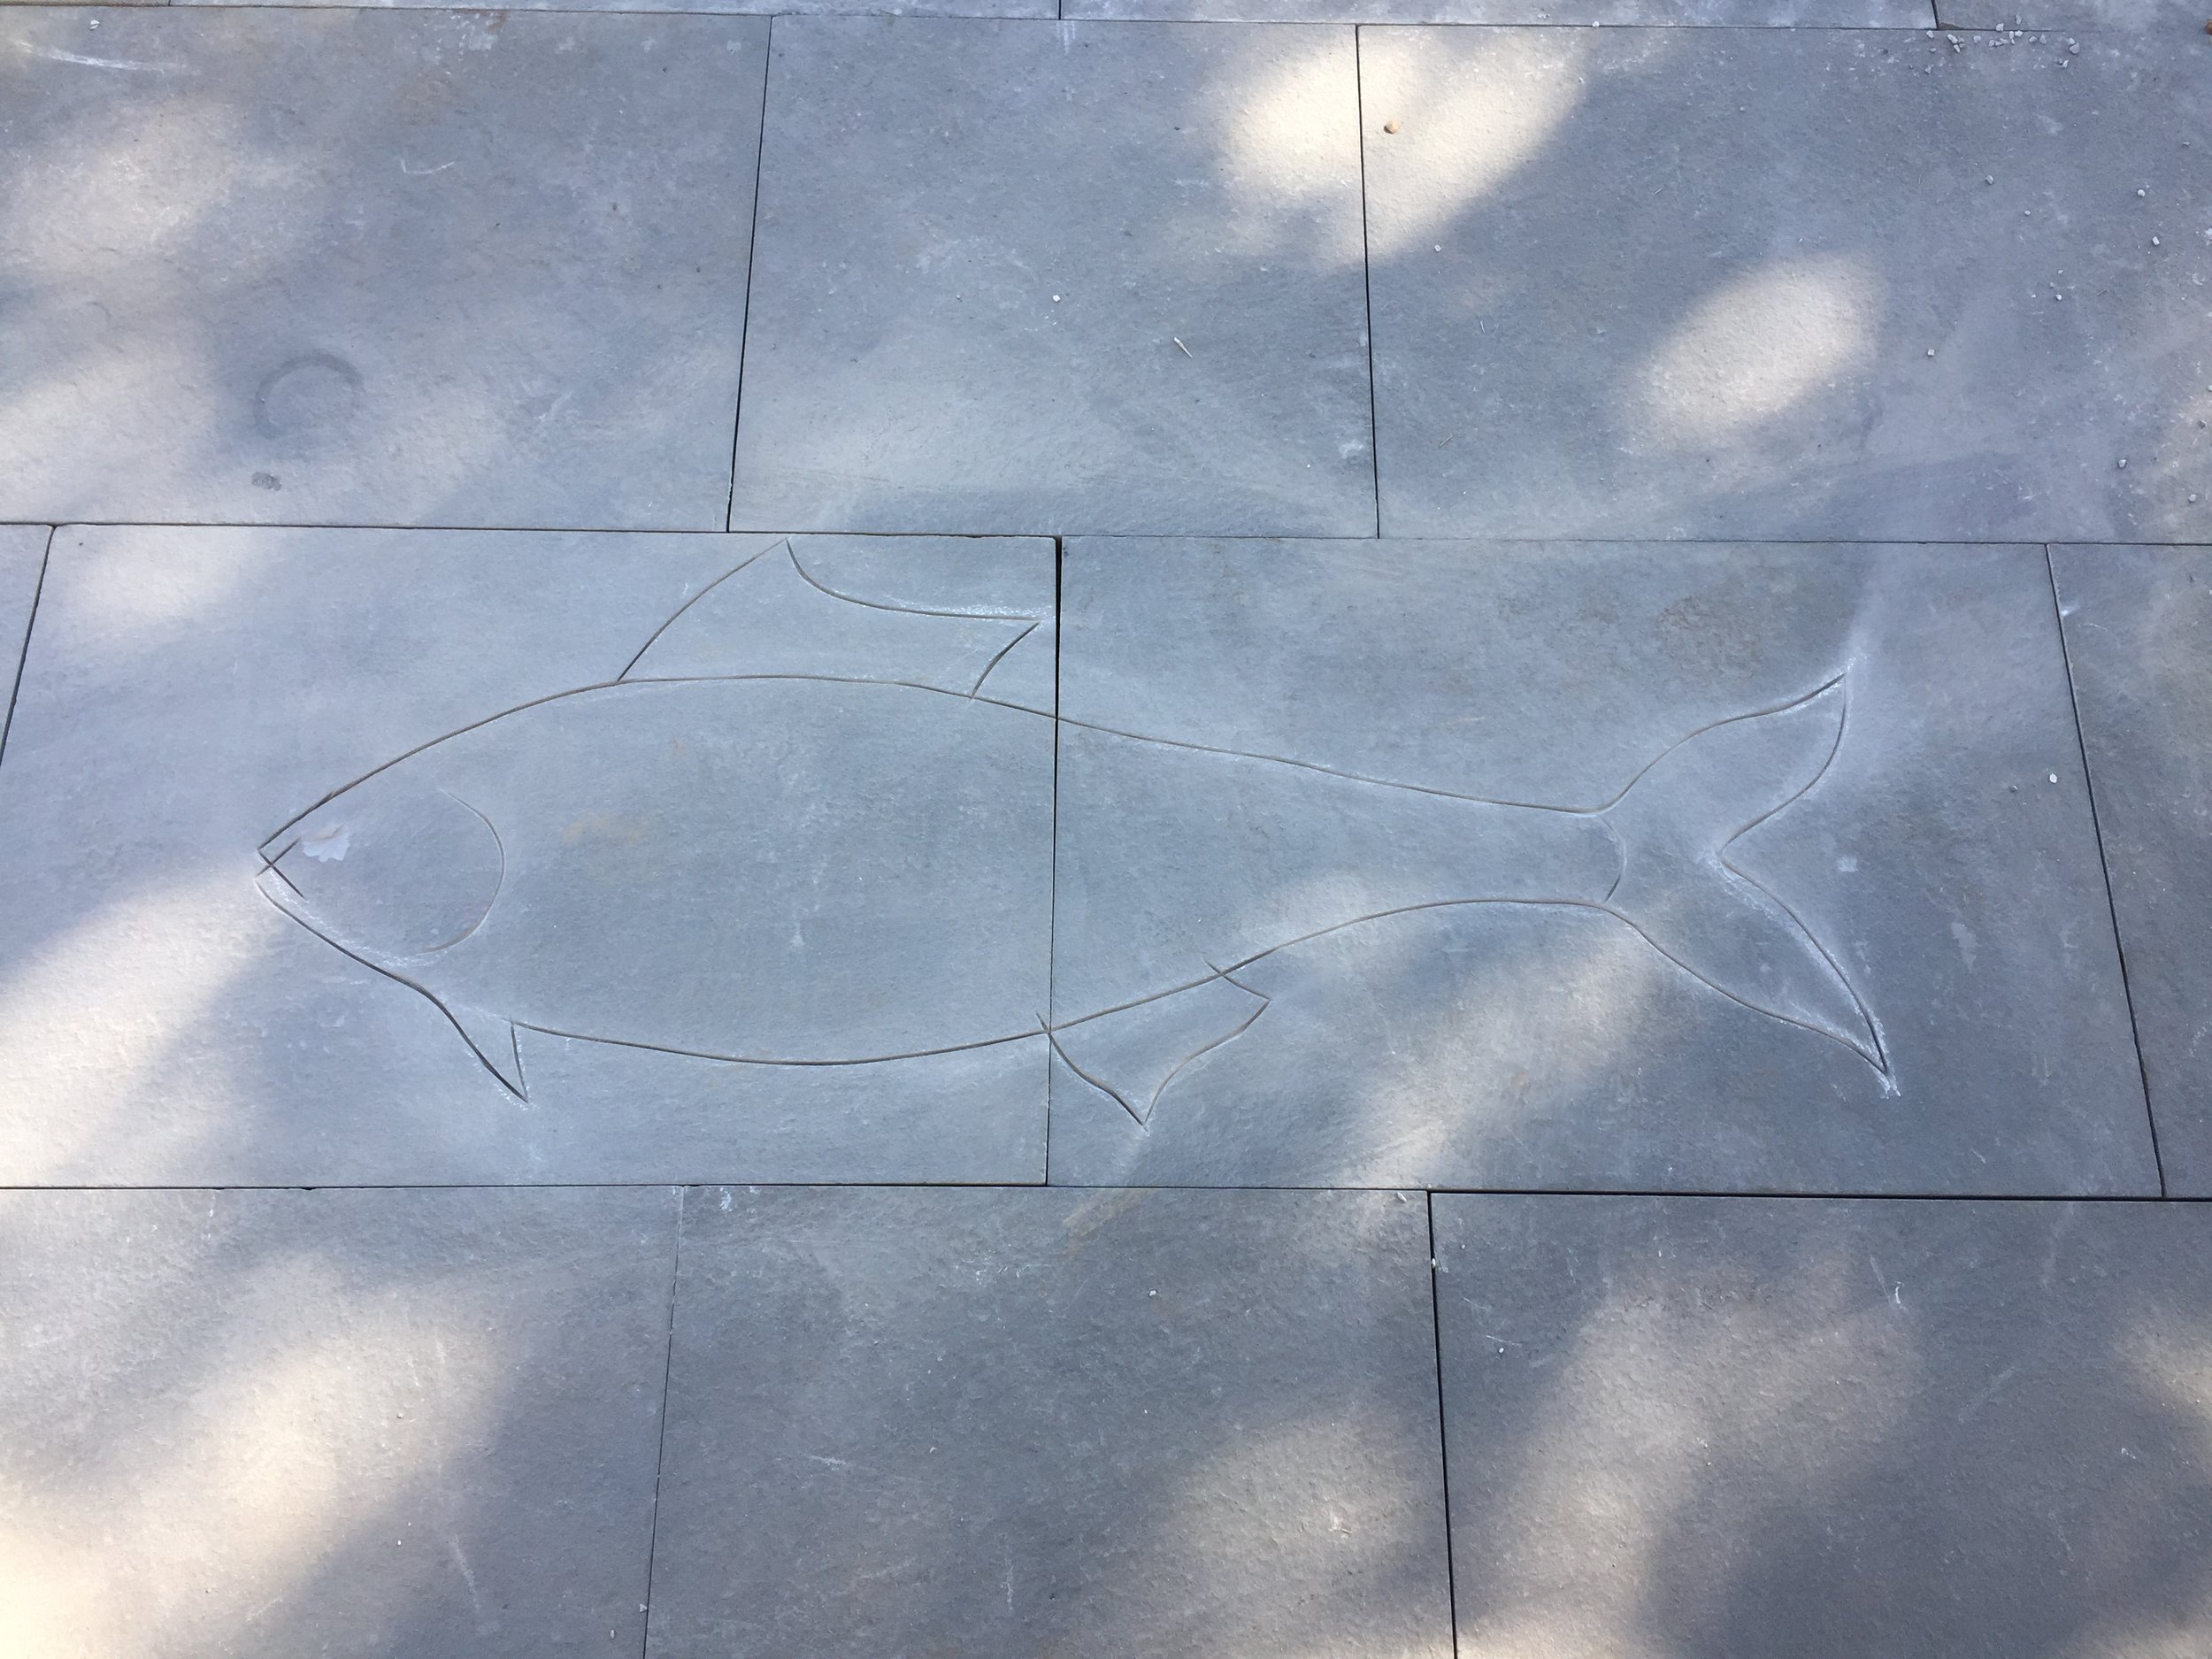  With the patio already installed, Willie’s steady hand cut the outline of the fish with a 4” grinder with a diamond blade.  We liked the way the outline looked so much we thought about leaving the fish like this.  It’s a nice subtle touch we might u